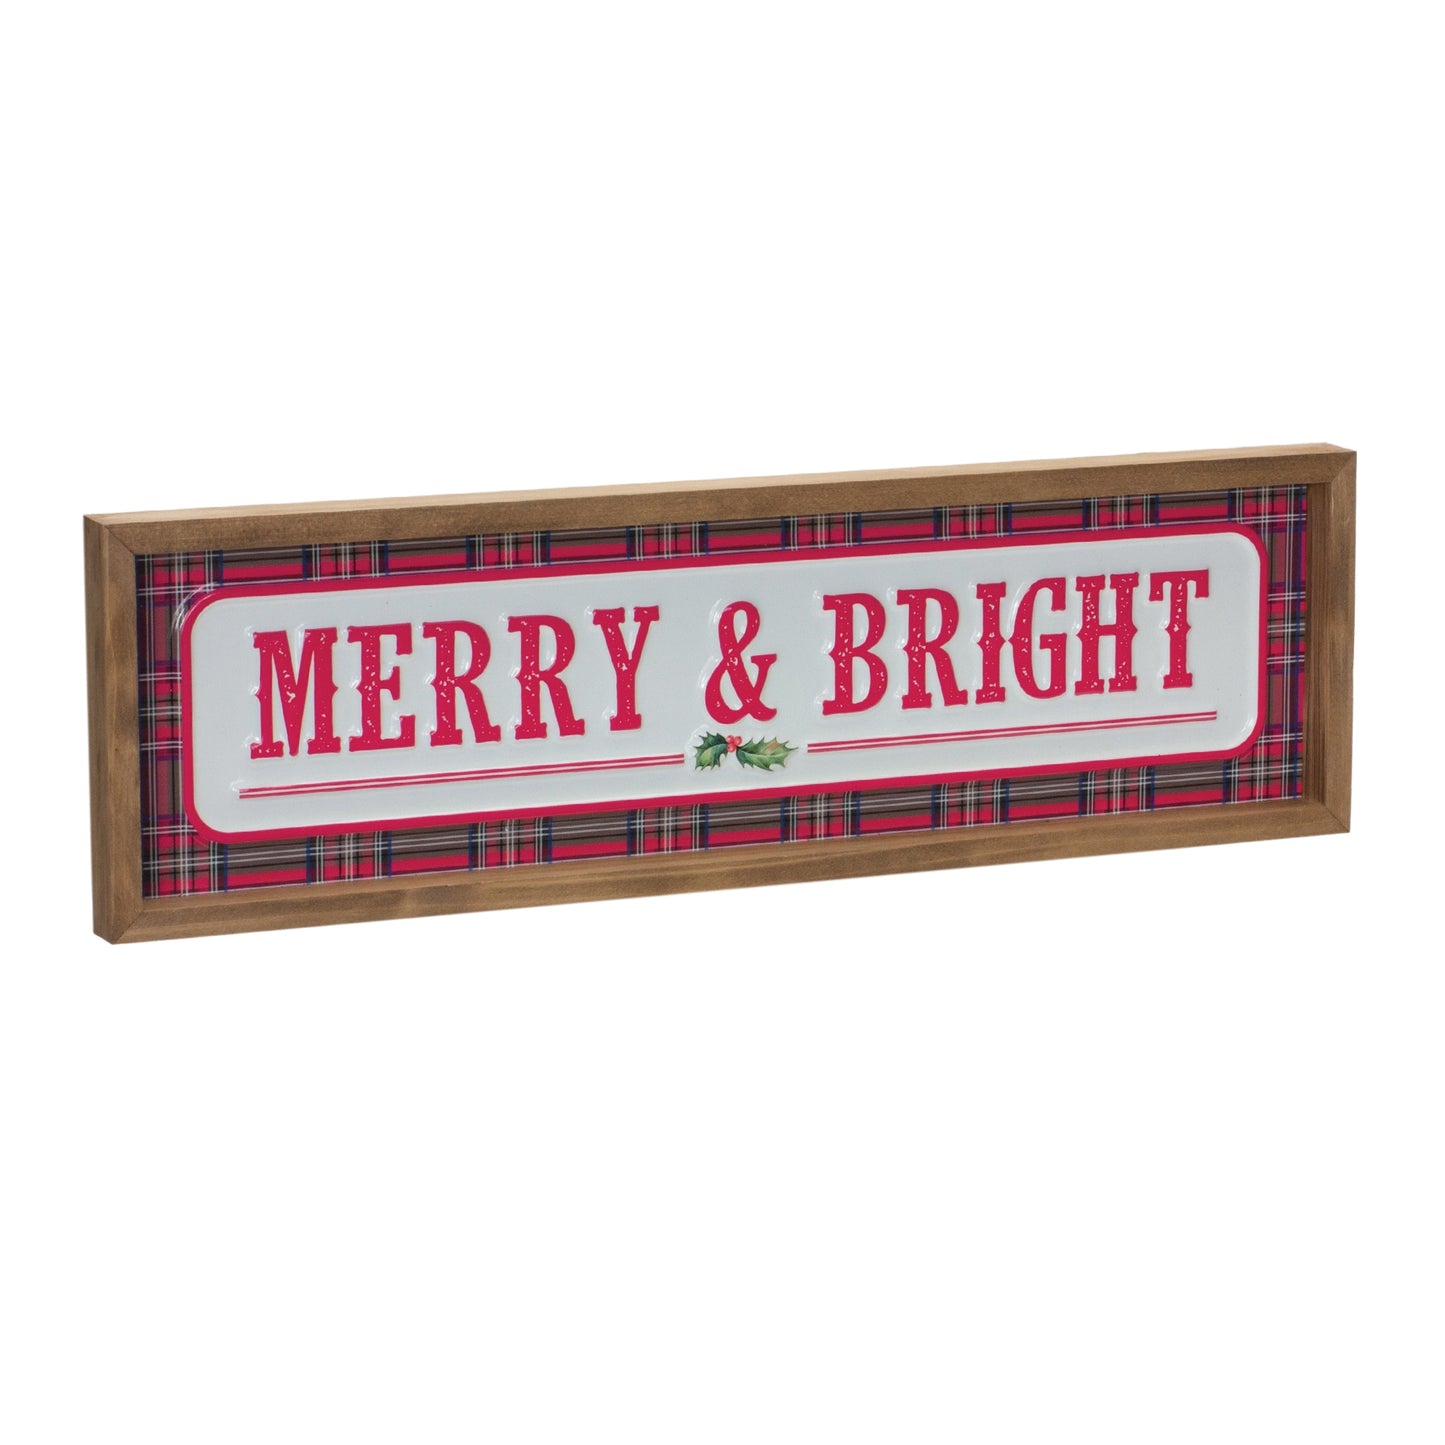 Merry & Bright Wall Sign